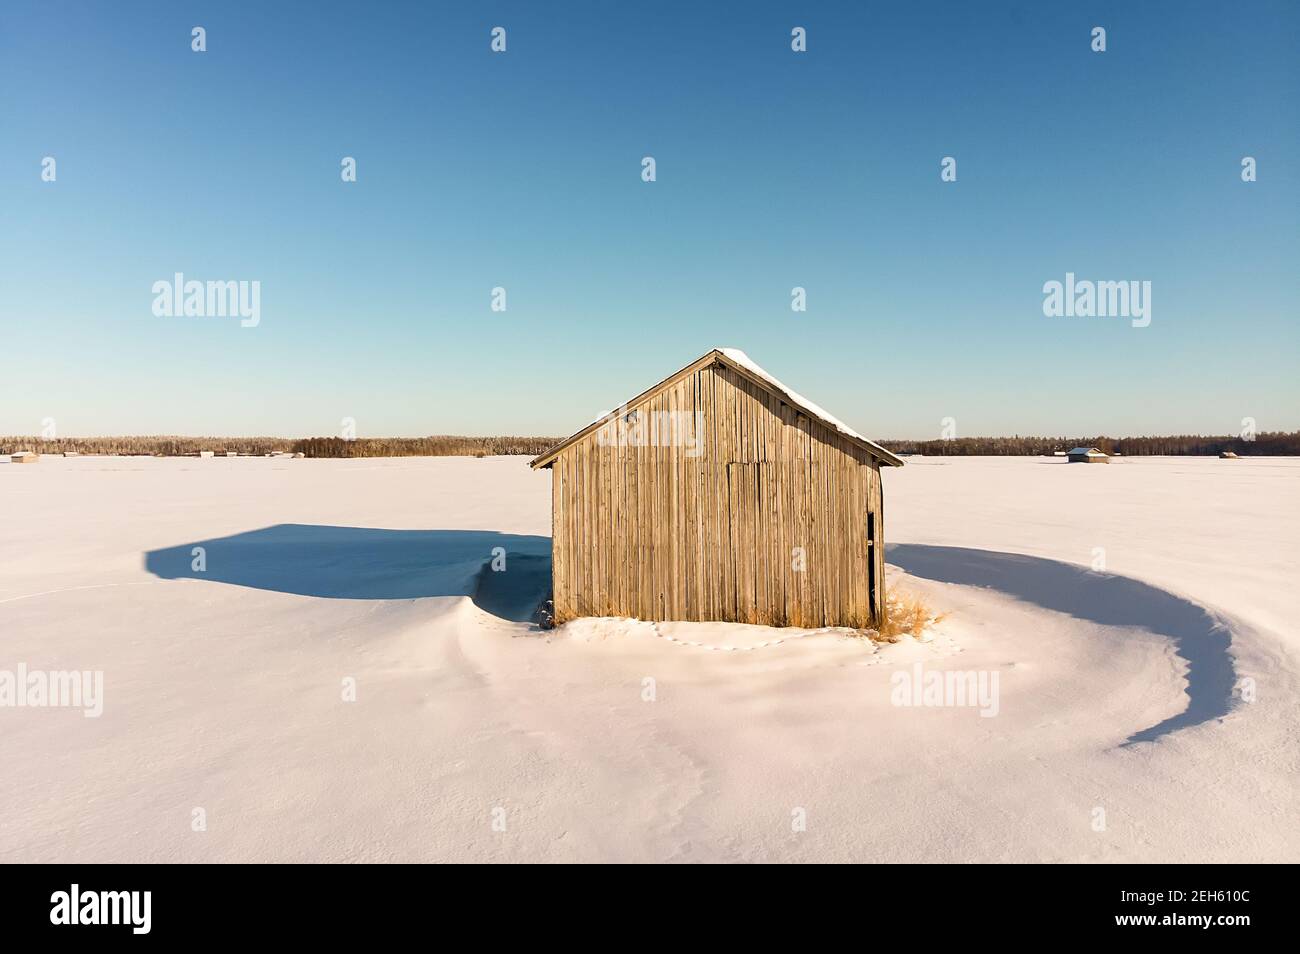 The winter sun creates strong shadows on the snowy fields. The old barn house stands alone on the vast fields. Stock Photo